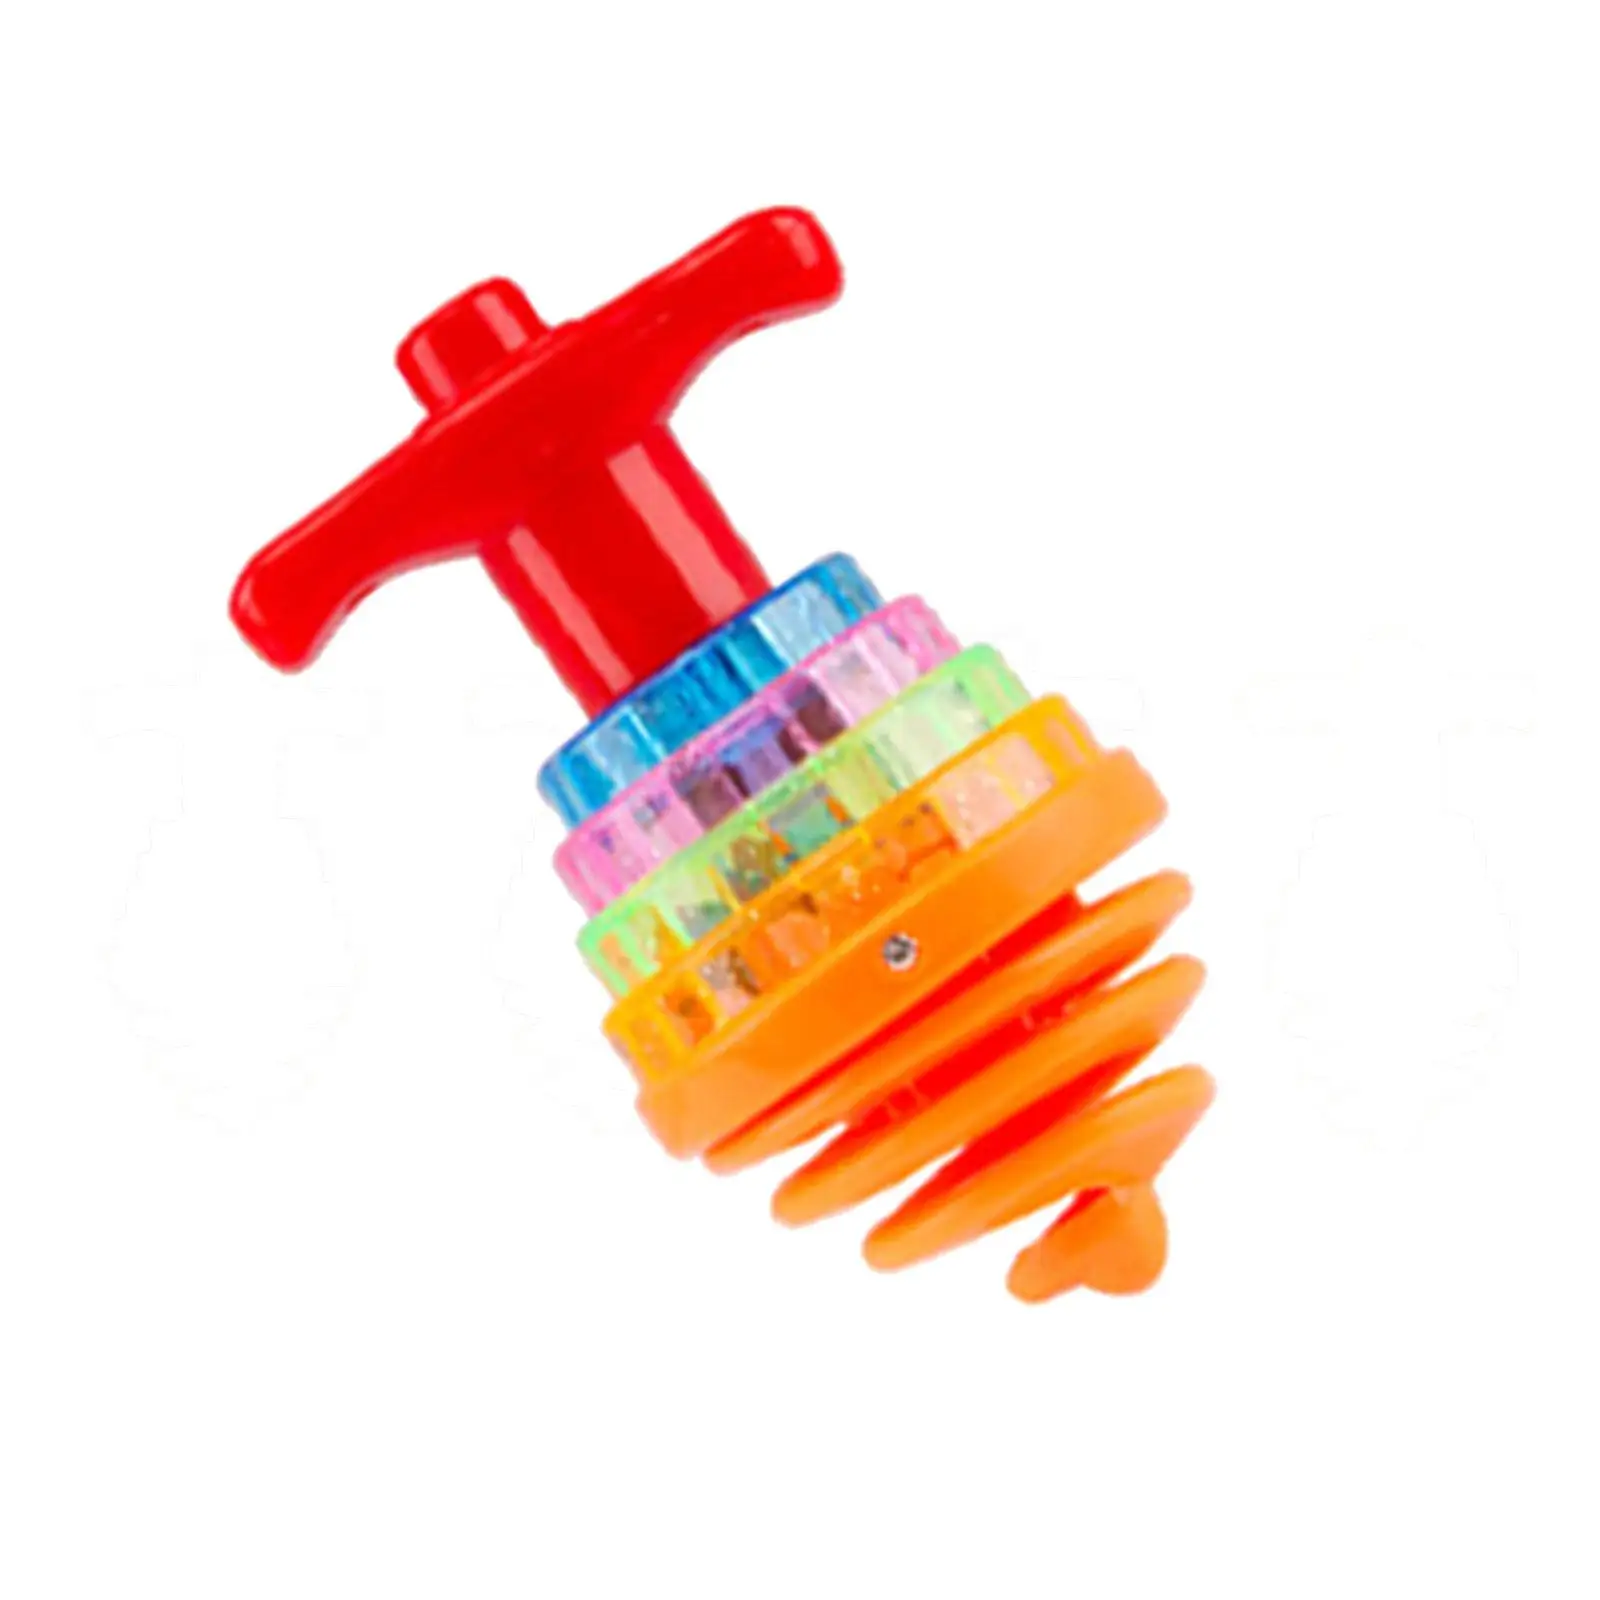 LED Music and Flash Light Glow Spiral Rotating Wheel Gyro Easy to Hold Novelty Gyro Peg Toy for Classic Toy Party Favor